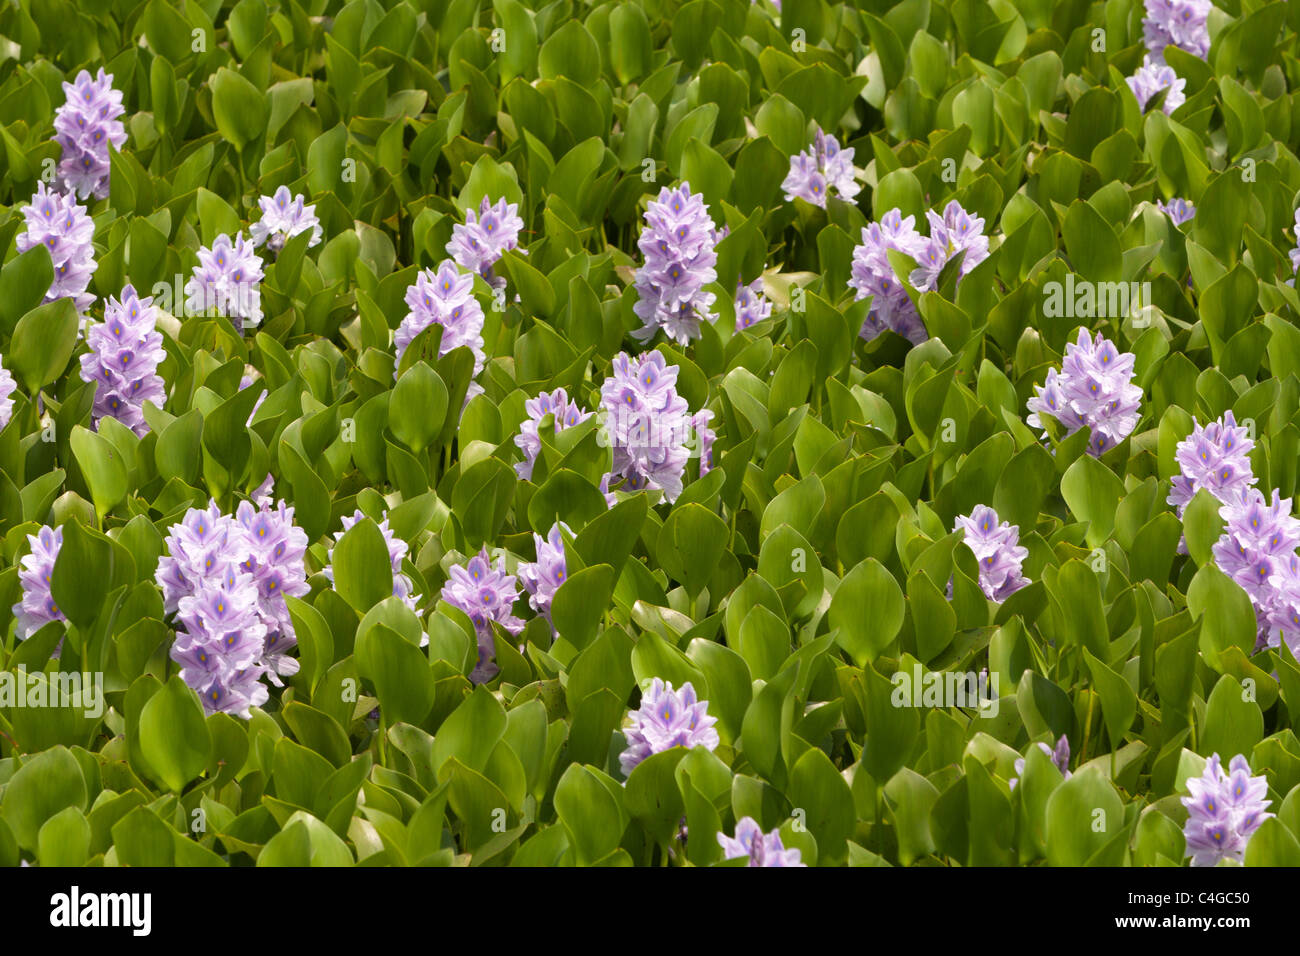 Common water hyacinth (Eichhornia crassipes) floating perennial aquatic plant (hydrophyte) flowering in pond, Hualien, Taiwan Stock Photo